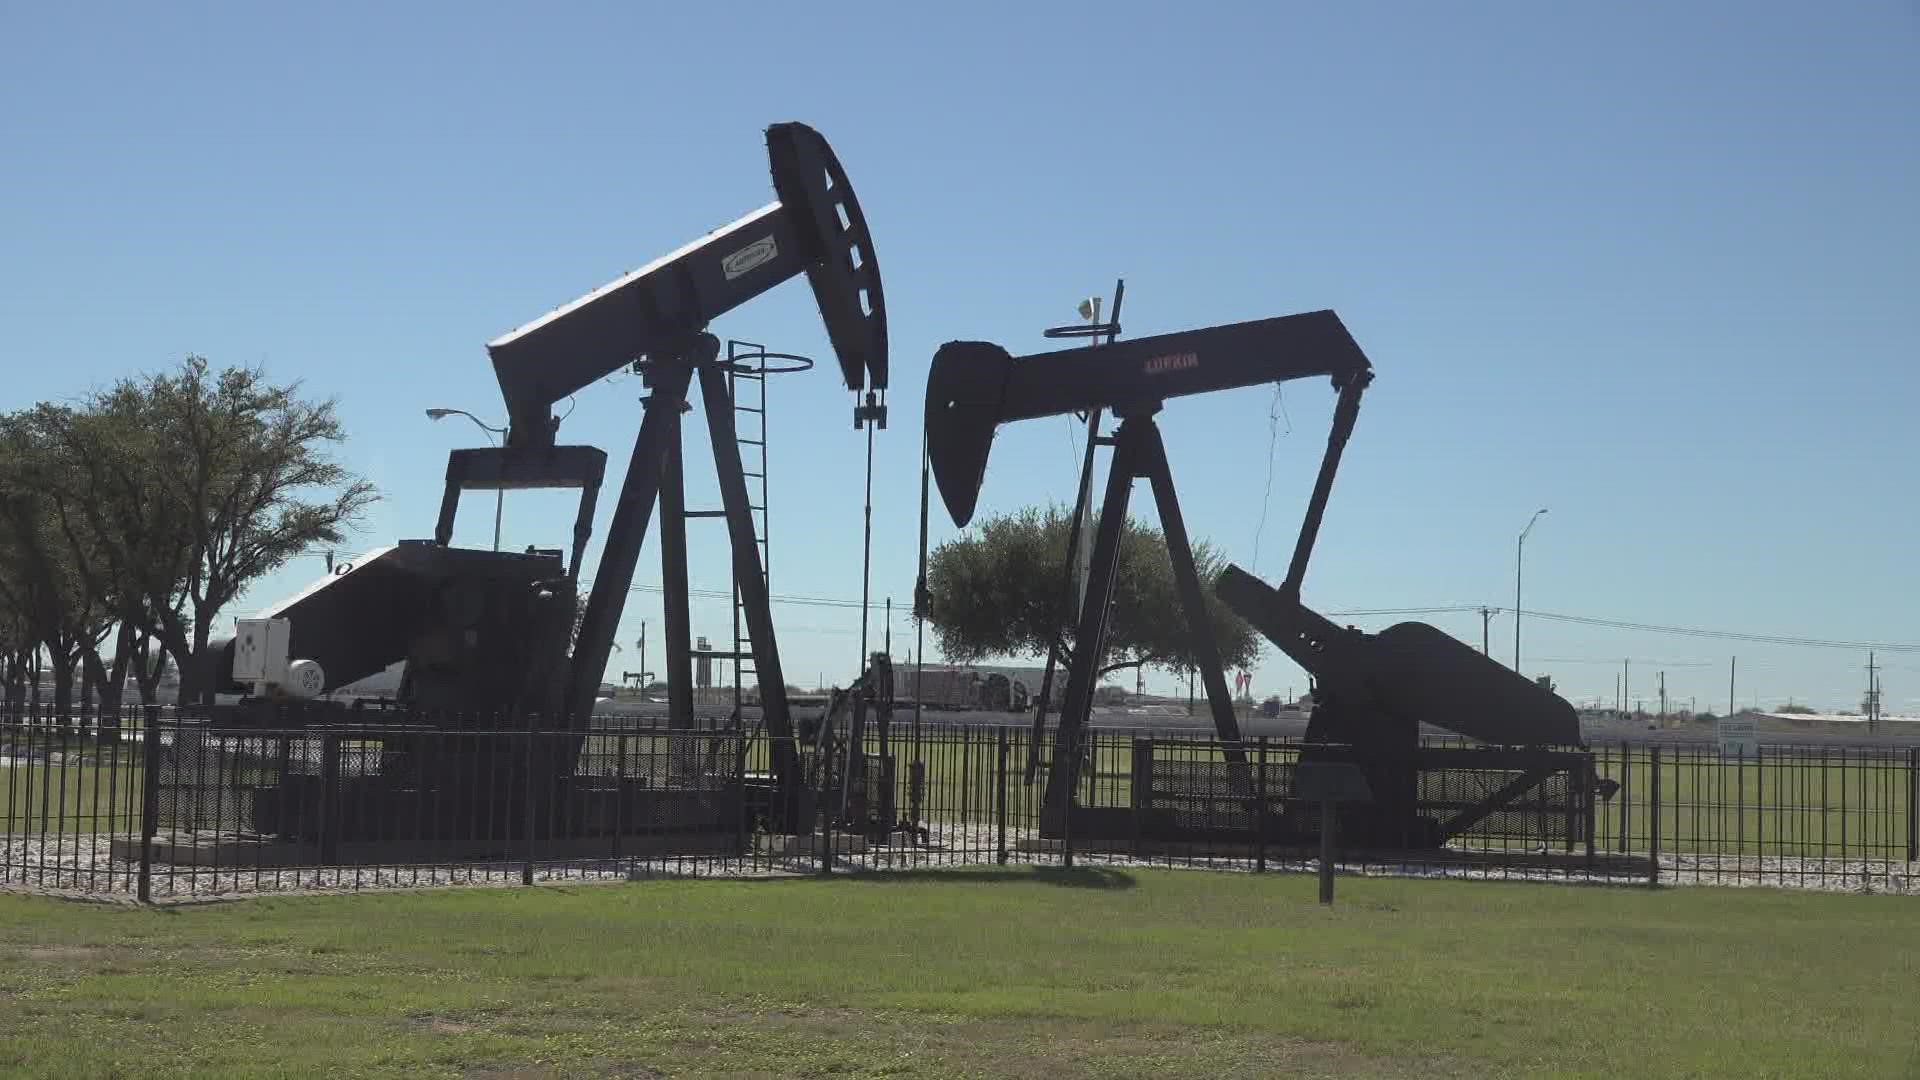 5.2 million barrels of oil and 20 billion cubic feet of gas is produced per day in the Permian Basin.